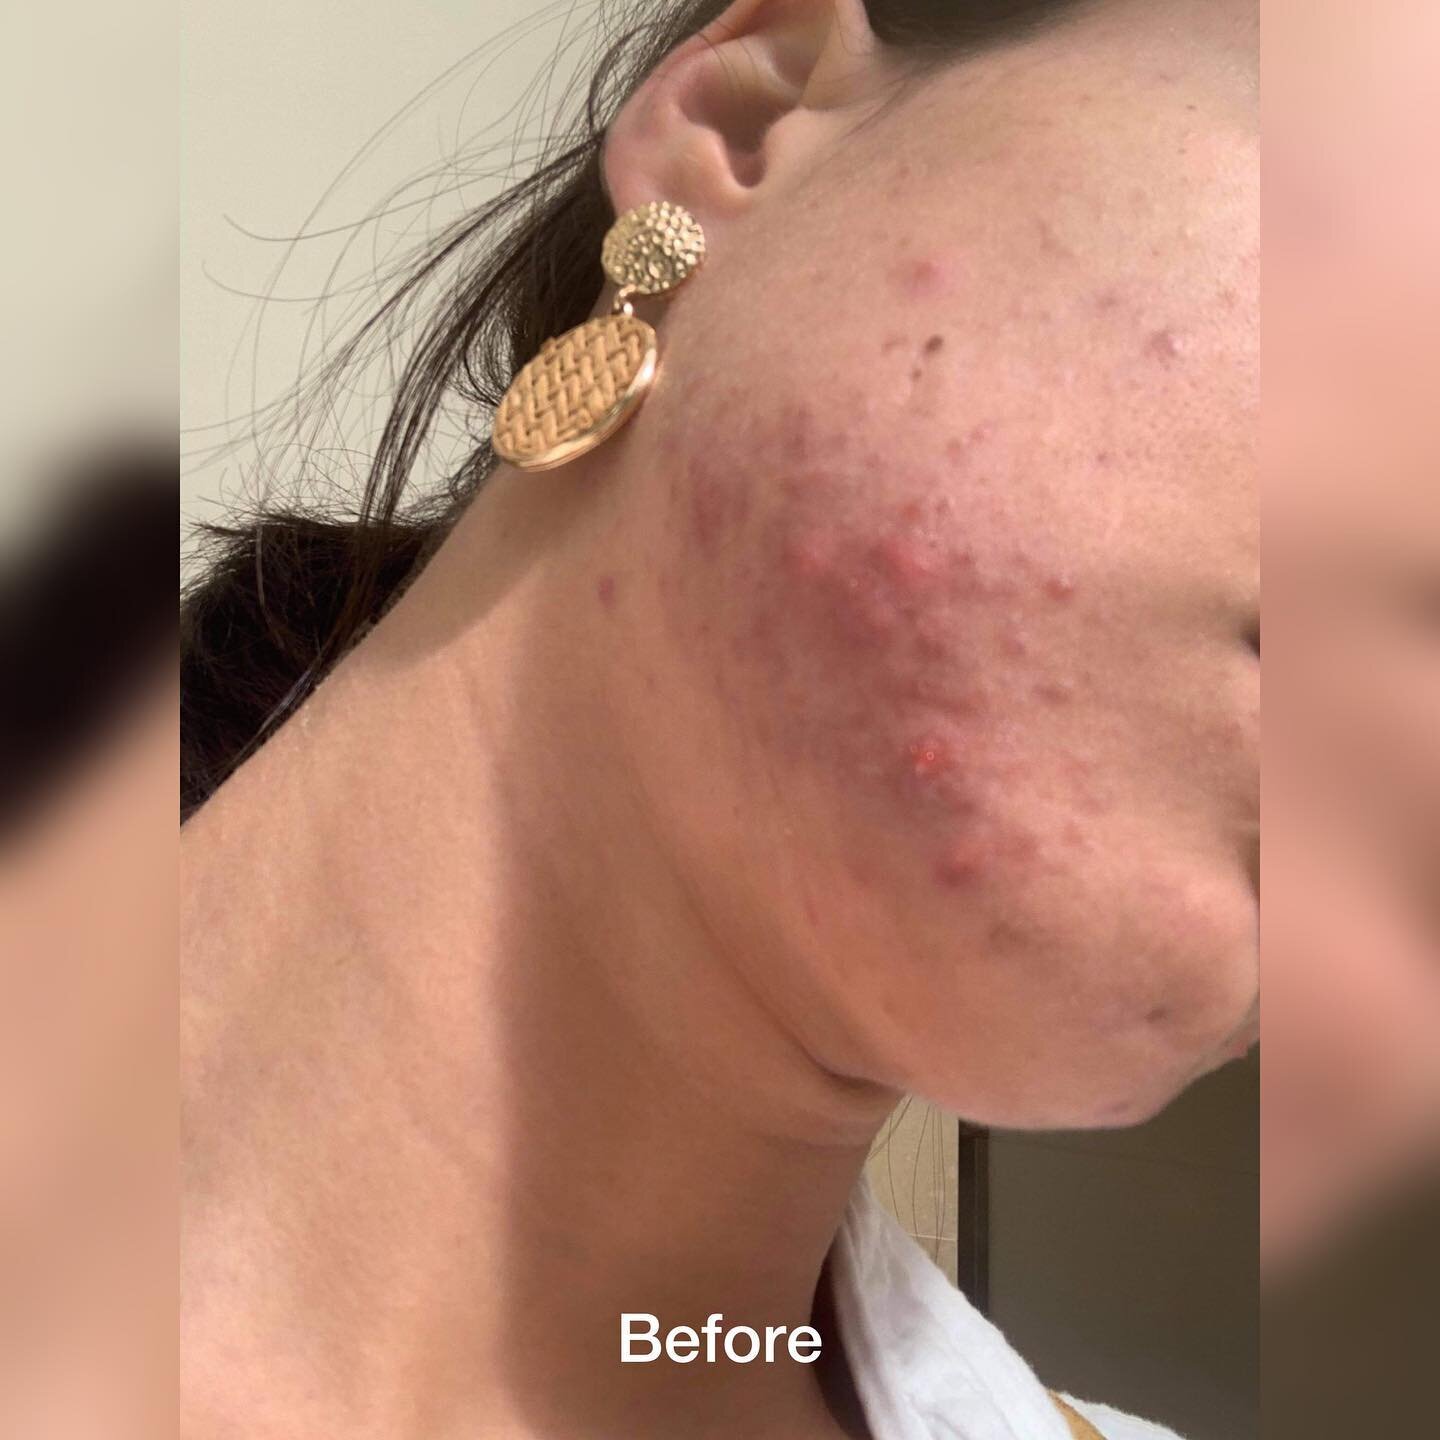 Before &amp; After results after 2 Days! 👉🏼

Swipe right to see this skin transformation!

My friend has super painful cystic acne around her jawline and chin and I knew I could help as I&rsquo;ve been in her shoes before. 

This was the result aft